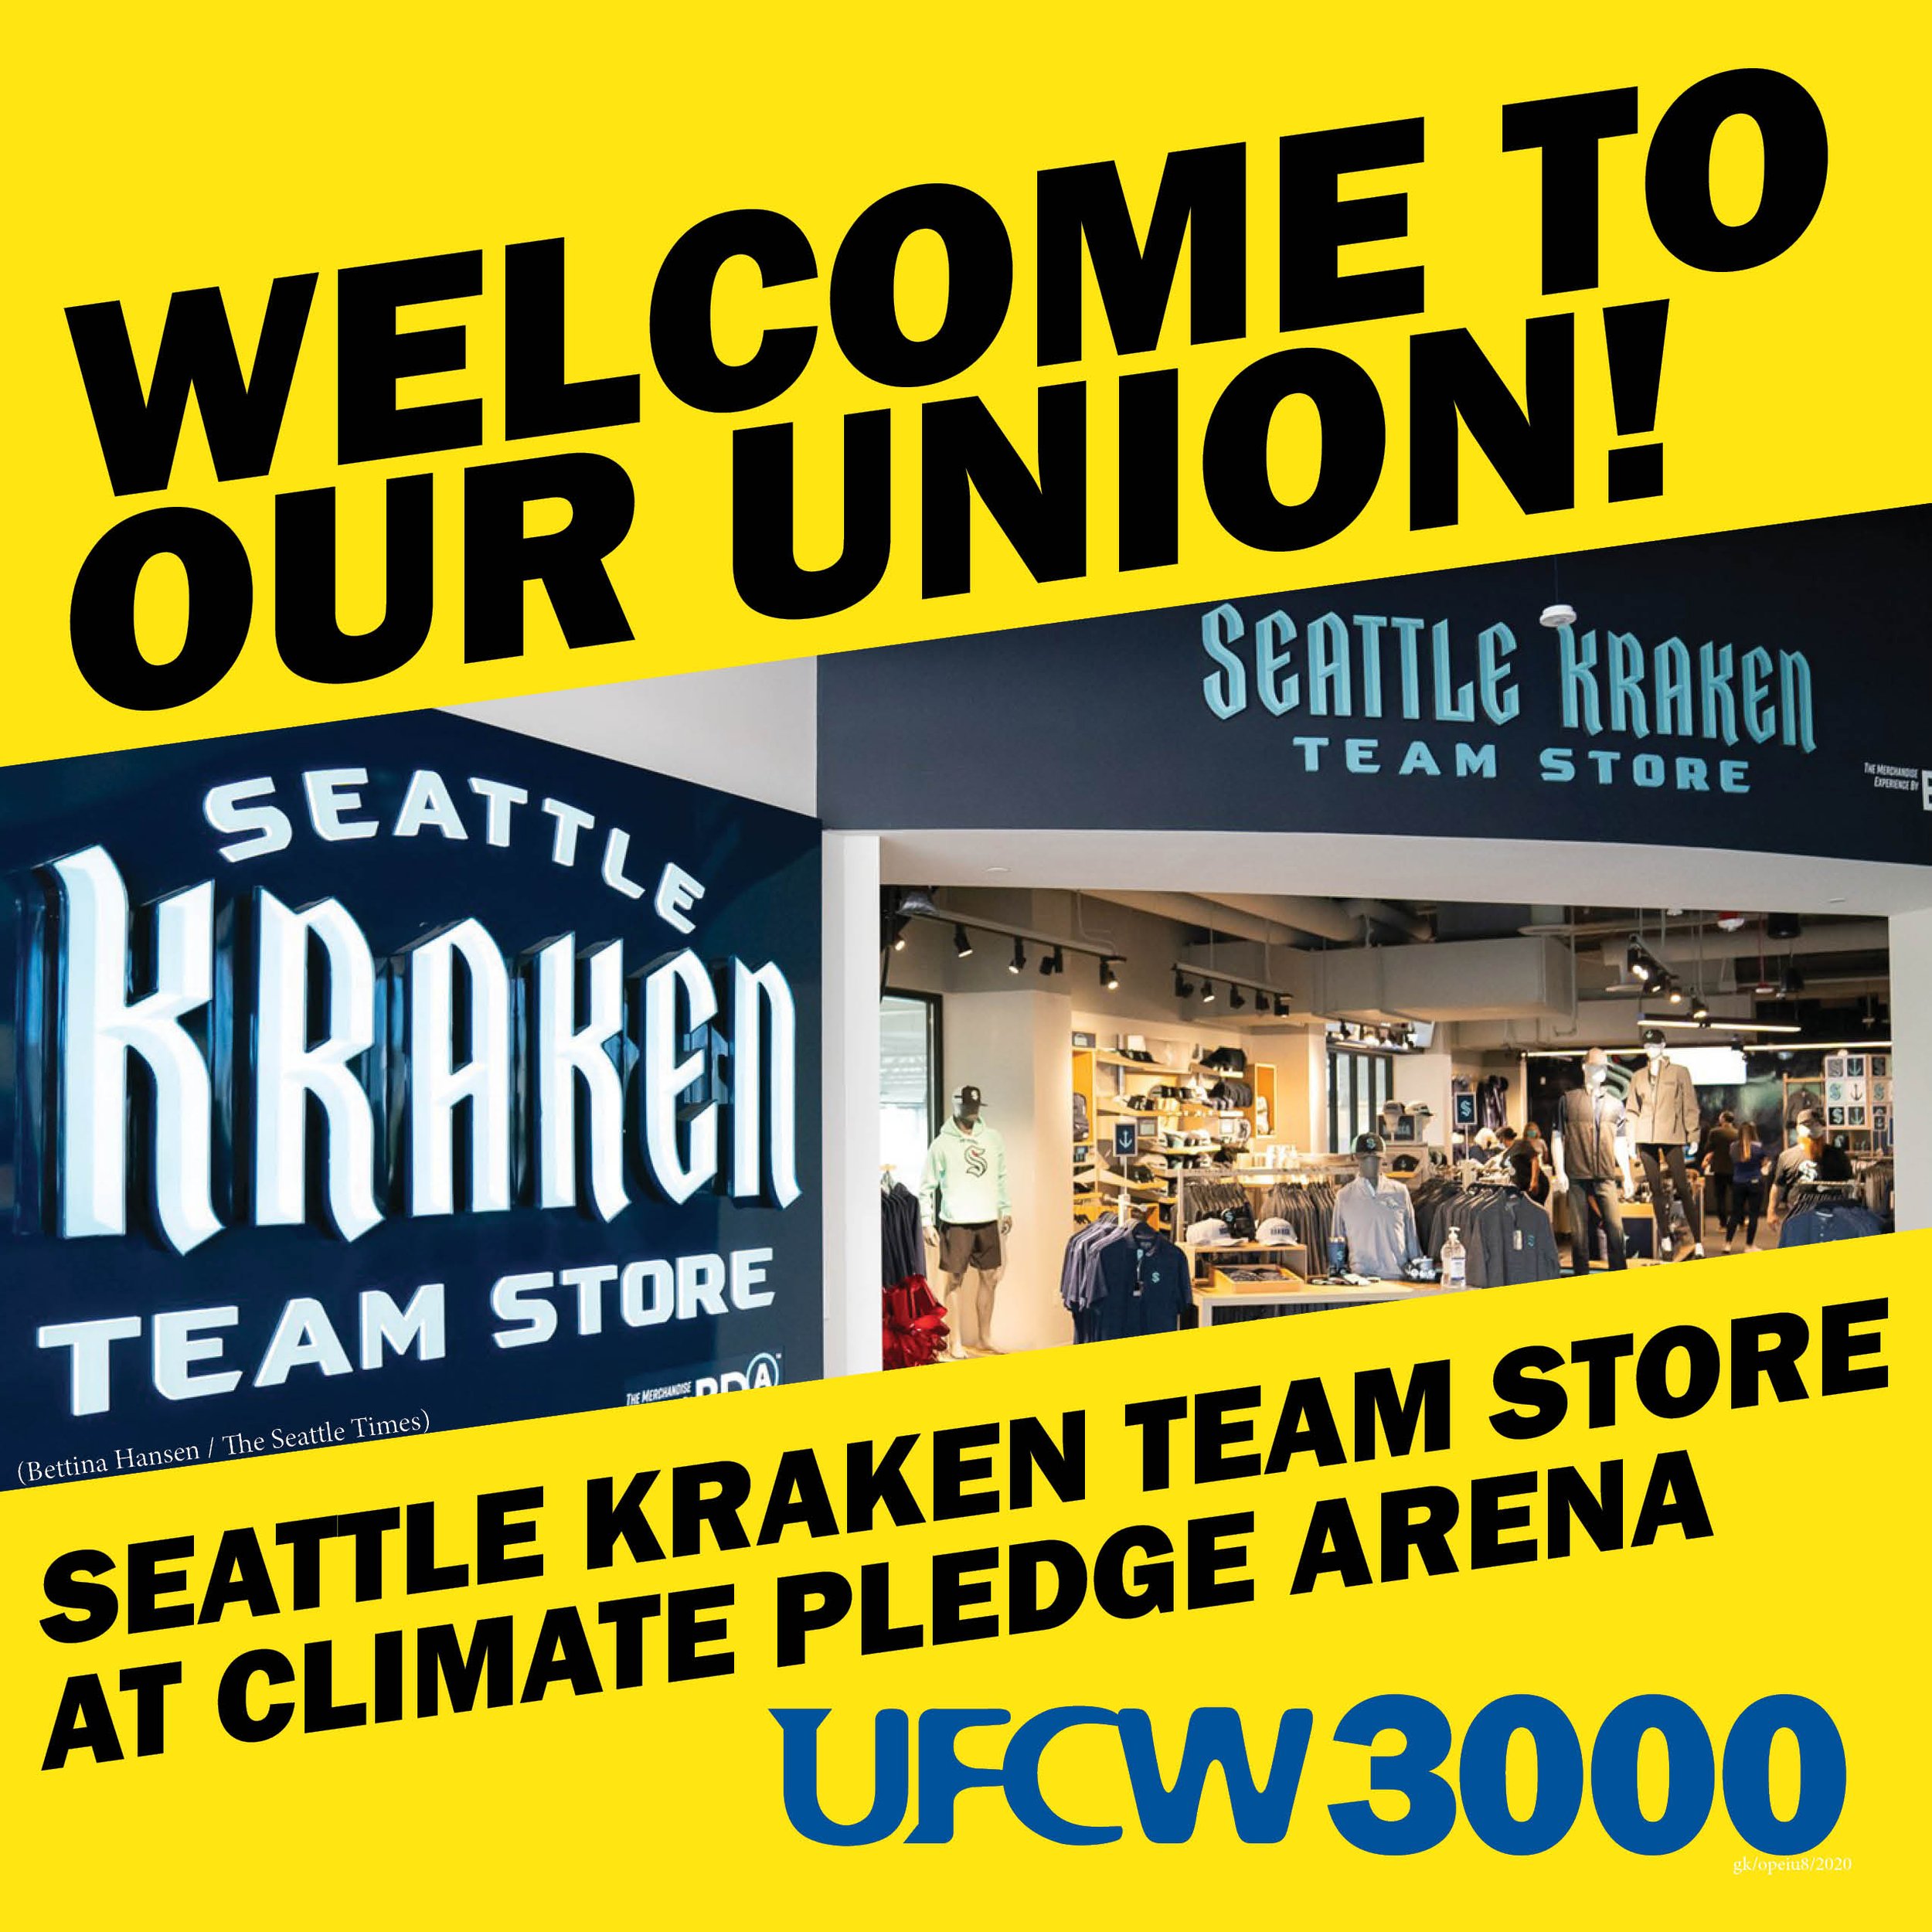 Welcome to our Union Seattle Kraken Team Store workers — UFCW 3000